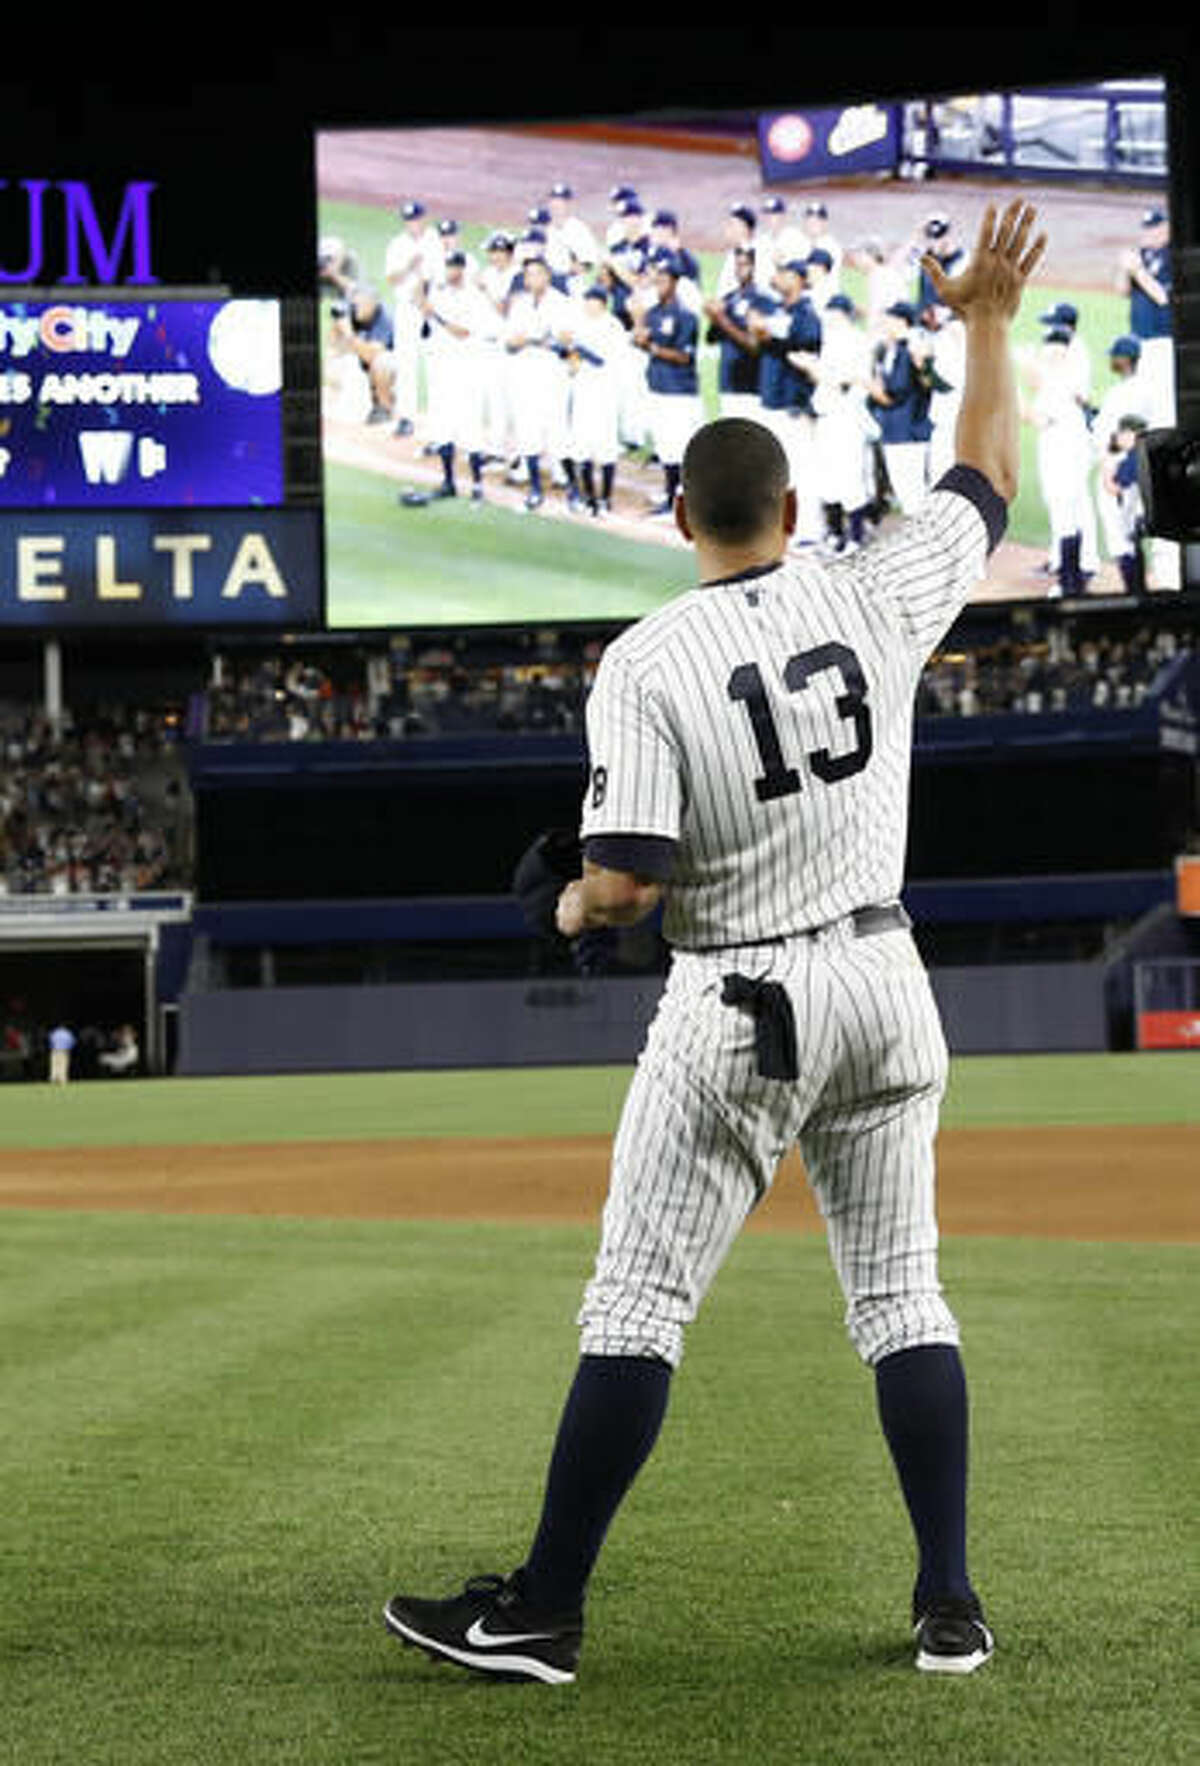 A-Rod told he won't play field in final game 